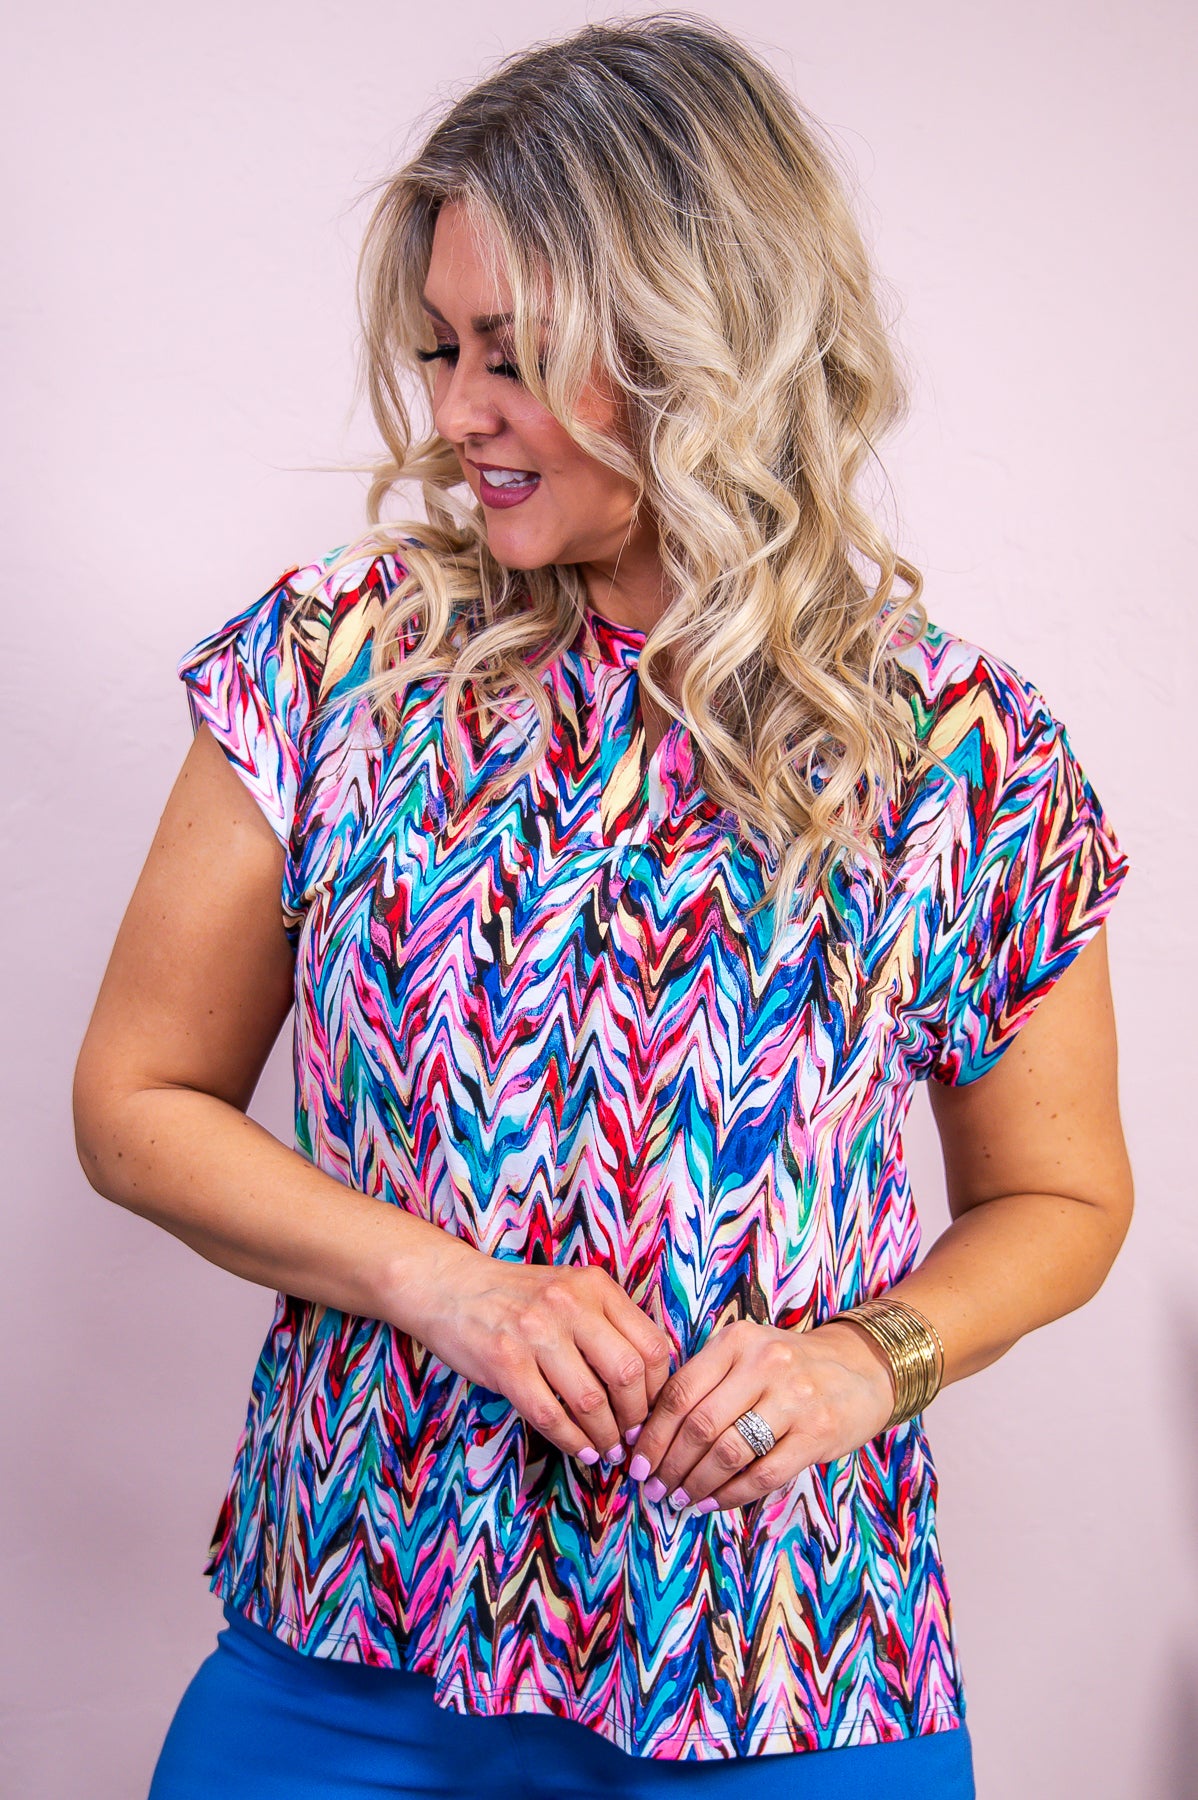 Just A Touch Of Sass Neon Pink/Multi Color Printed Top - T9204NPK